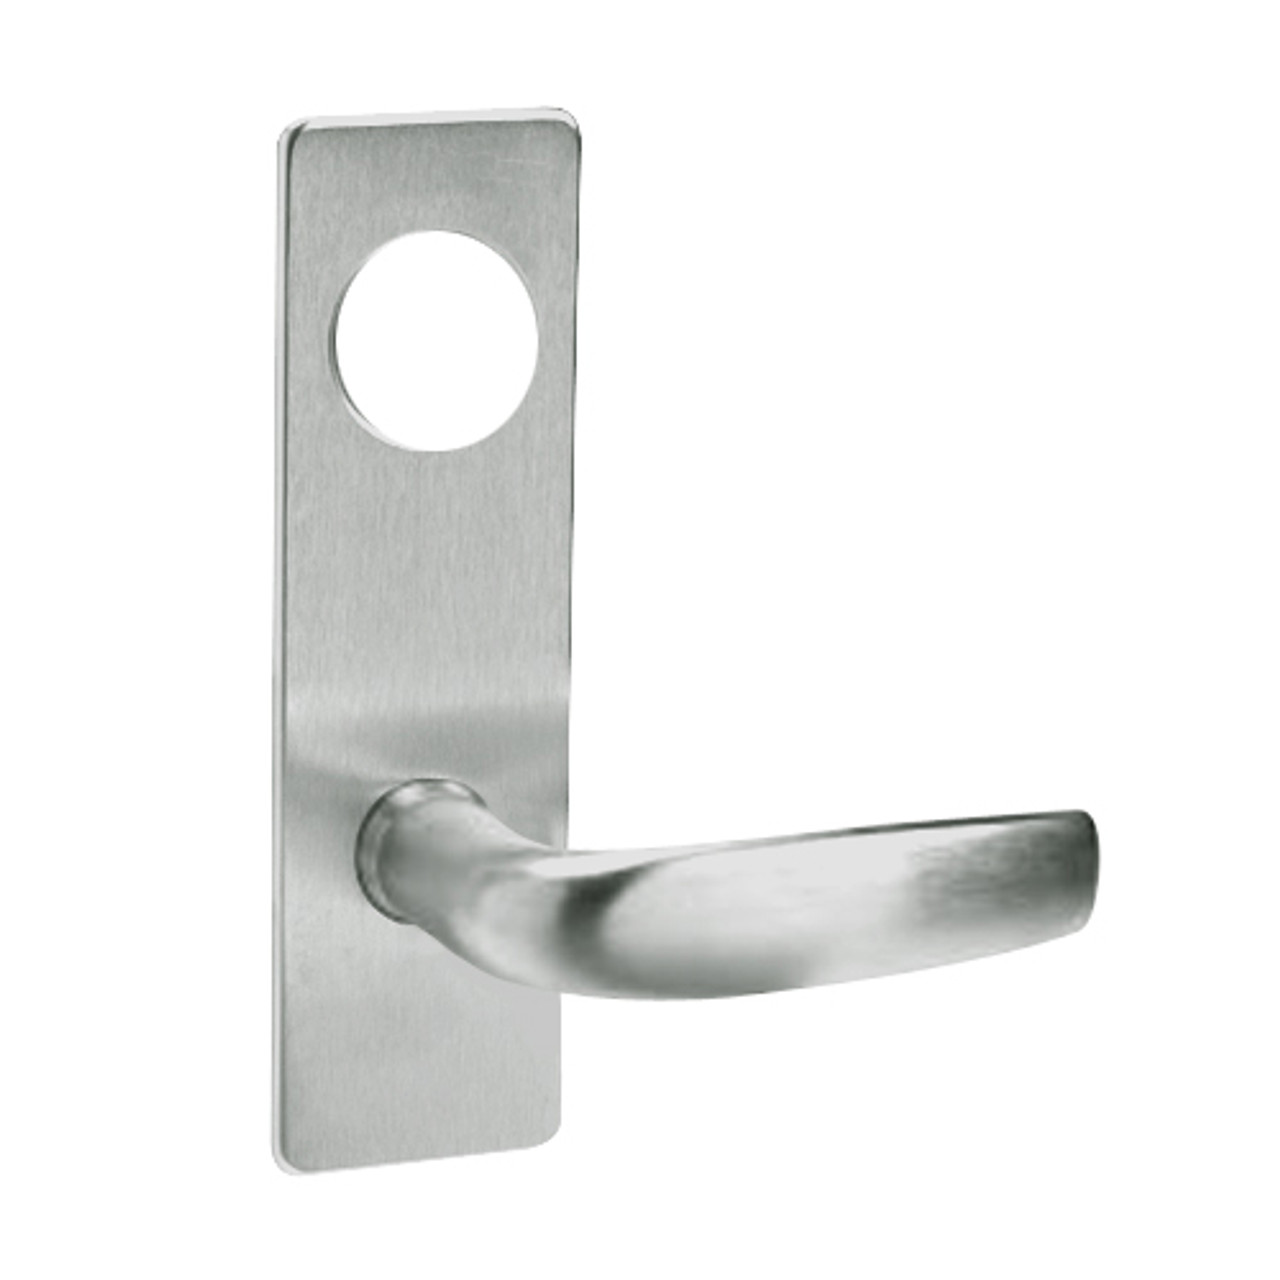 ML2069-CSN-619 Corbin Russwin ML2000 Series Mortise Institution Privacy Locksets with Citation Lever in Satin Nickel